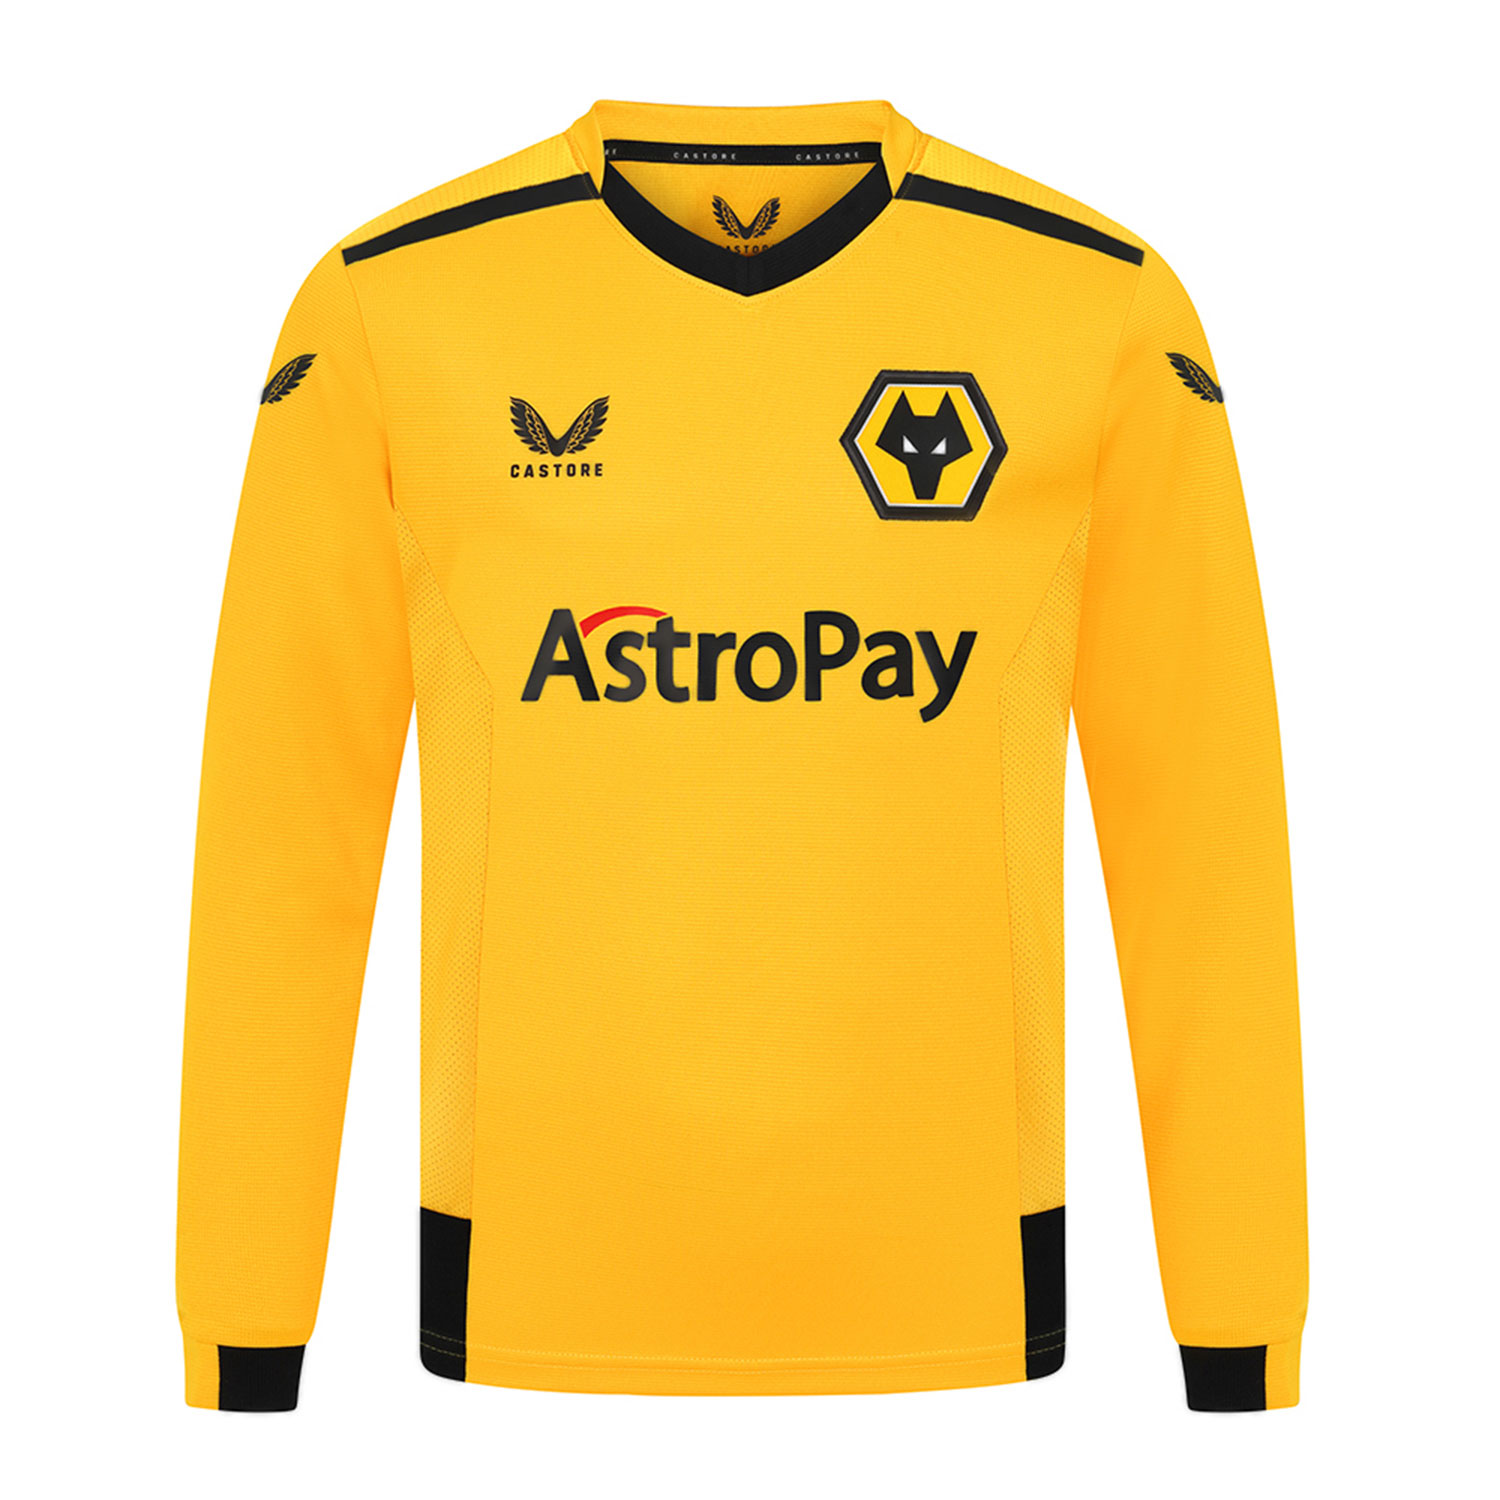 2022-23 Wolves Home Shirt - Long Sleeve - Junior
Be Part Of the Pack, with the 2022-23 Wolves Long Sleeved Junior Home Shirt and show your pride on the street and in the stands.
Featuring detailed colour matching and dyeing to be true Wolves Gold and bring it back home to the club and fans.

Angular mesh inner sleeve and body panels for extra ventilation
Wolves back neck taping
Featuring our new club sponsor AstroPay on front of shirt
100% Polyester
